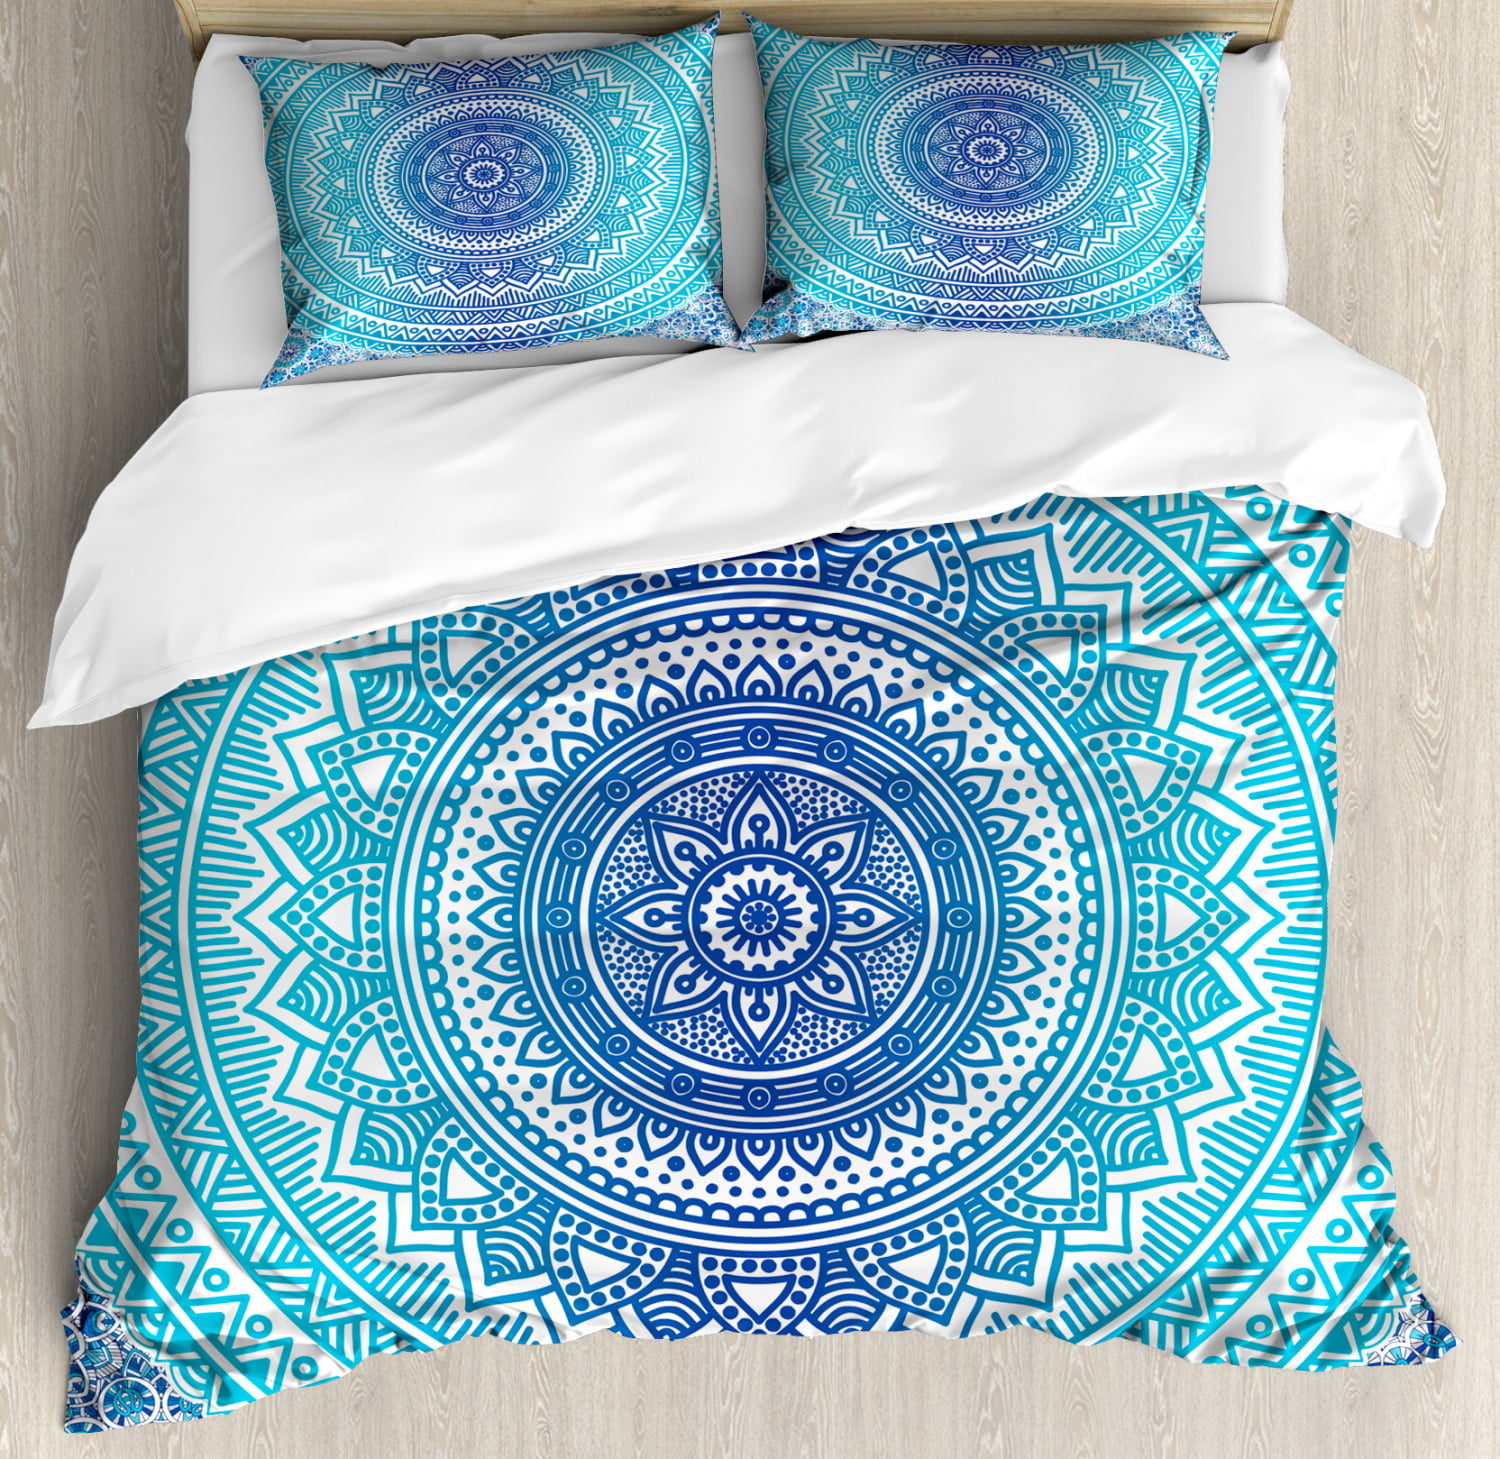 30 X 20 Decorative Standard Queen Size Printed Pillowcase Modern Oriental Pattern with Sea Stars Florals Circles Inside Artwork Print Brown Turquoise Lunarable Paisley Pillow Sham